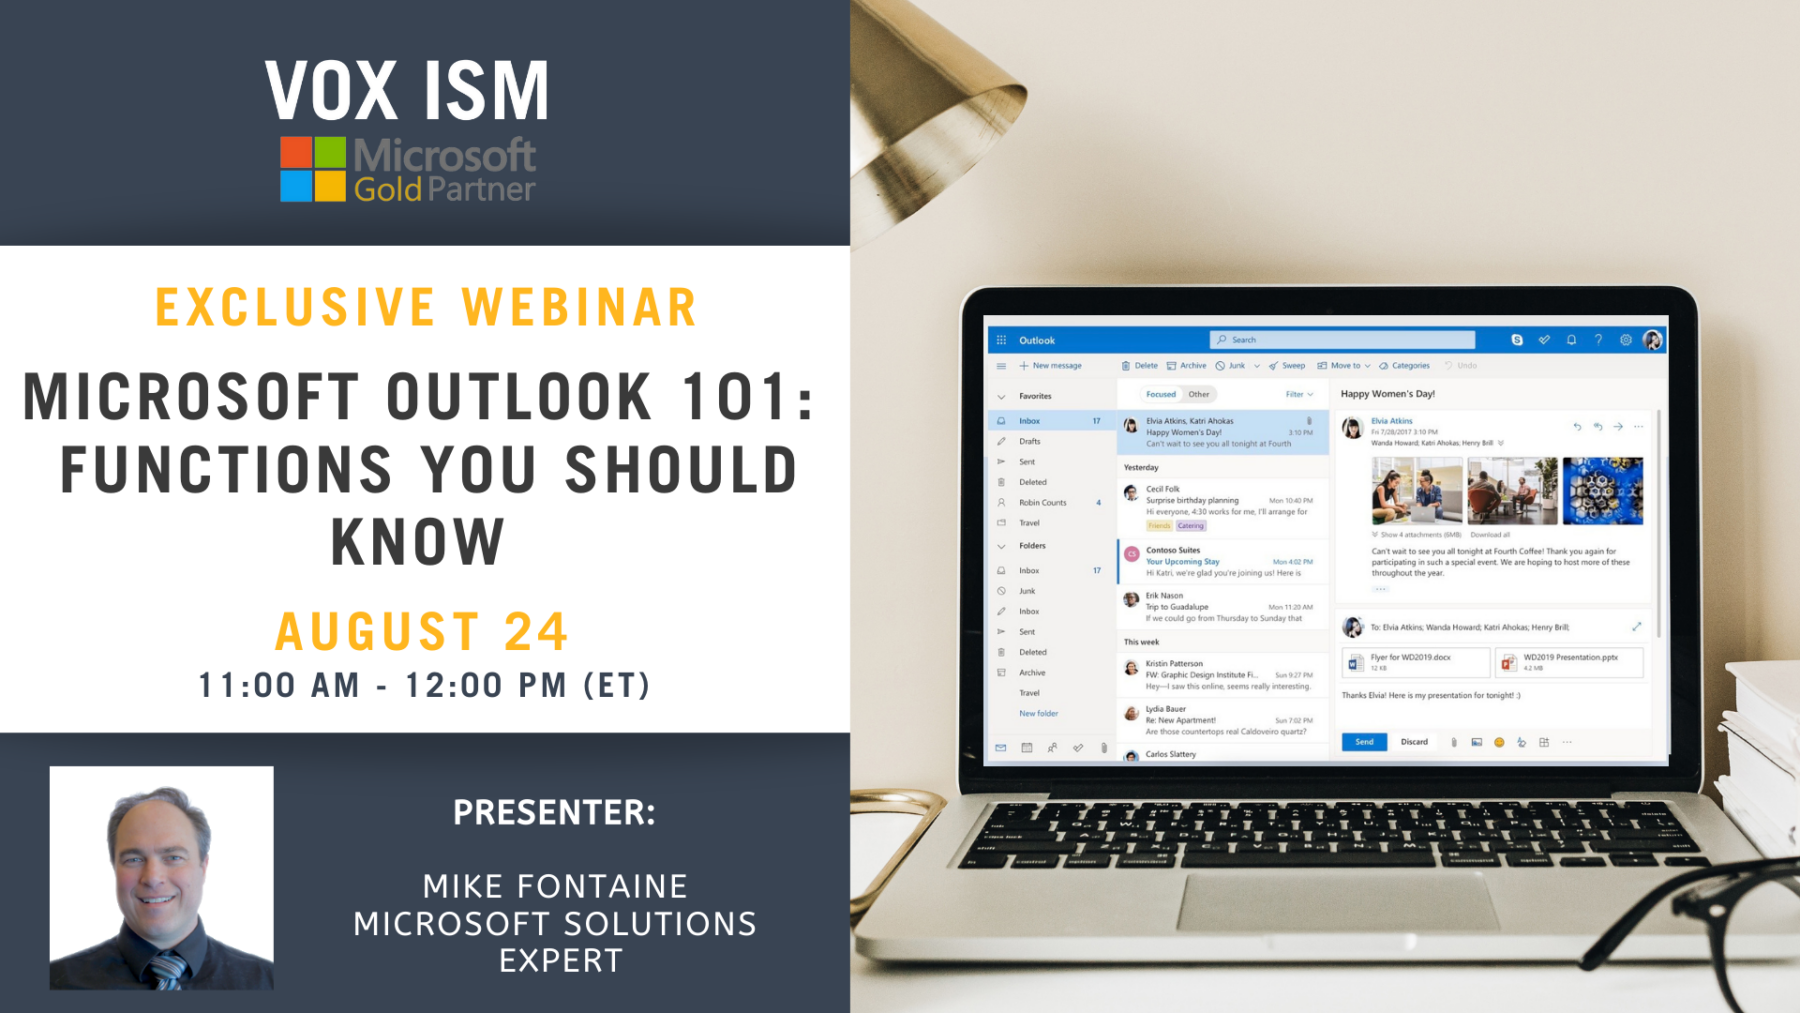 Microsoft Outlook 101 - Functions you should know - August 24 - Webinar